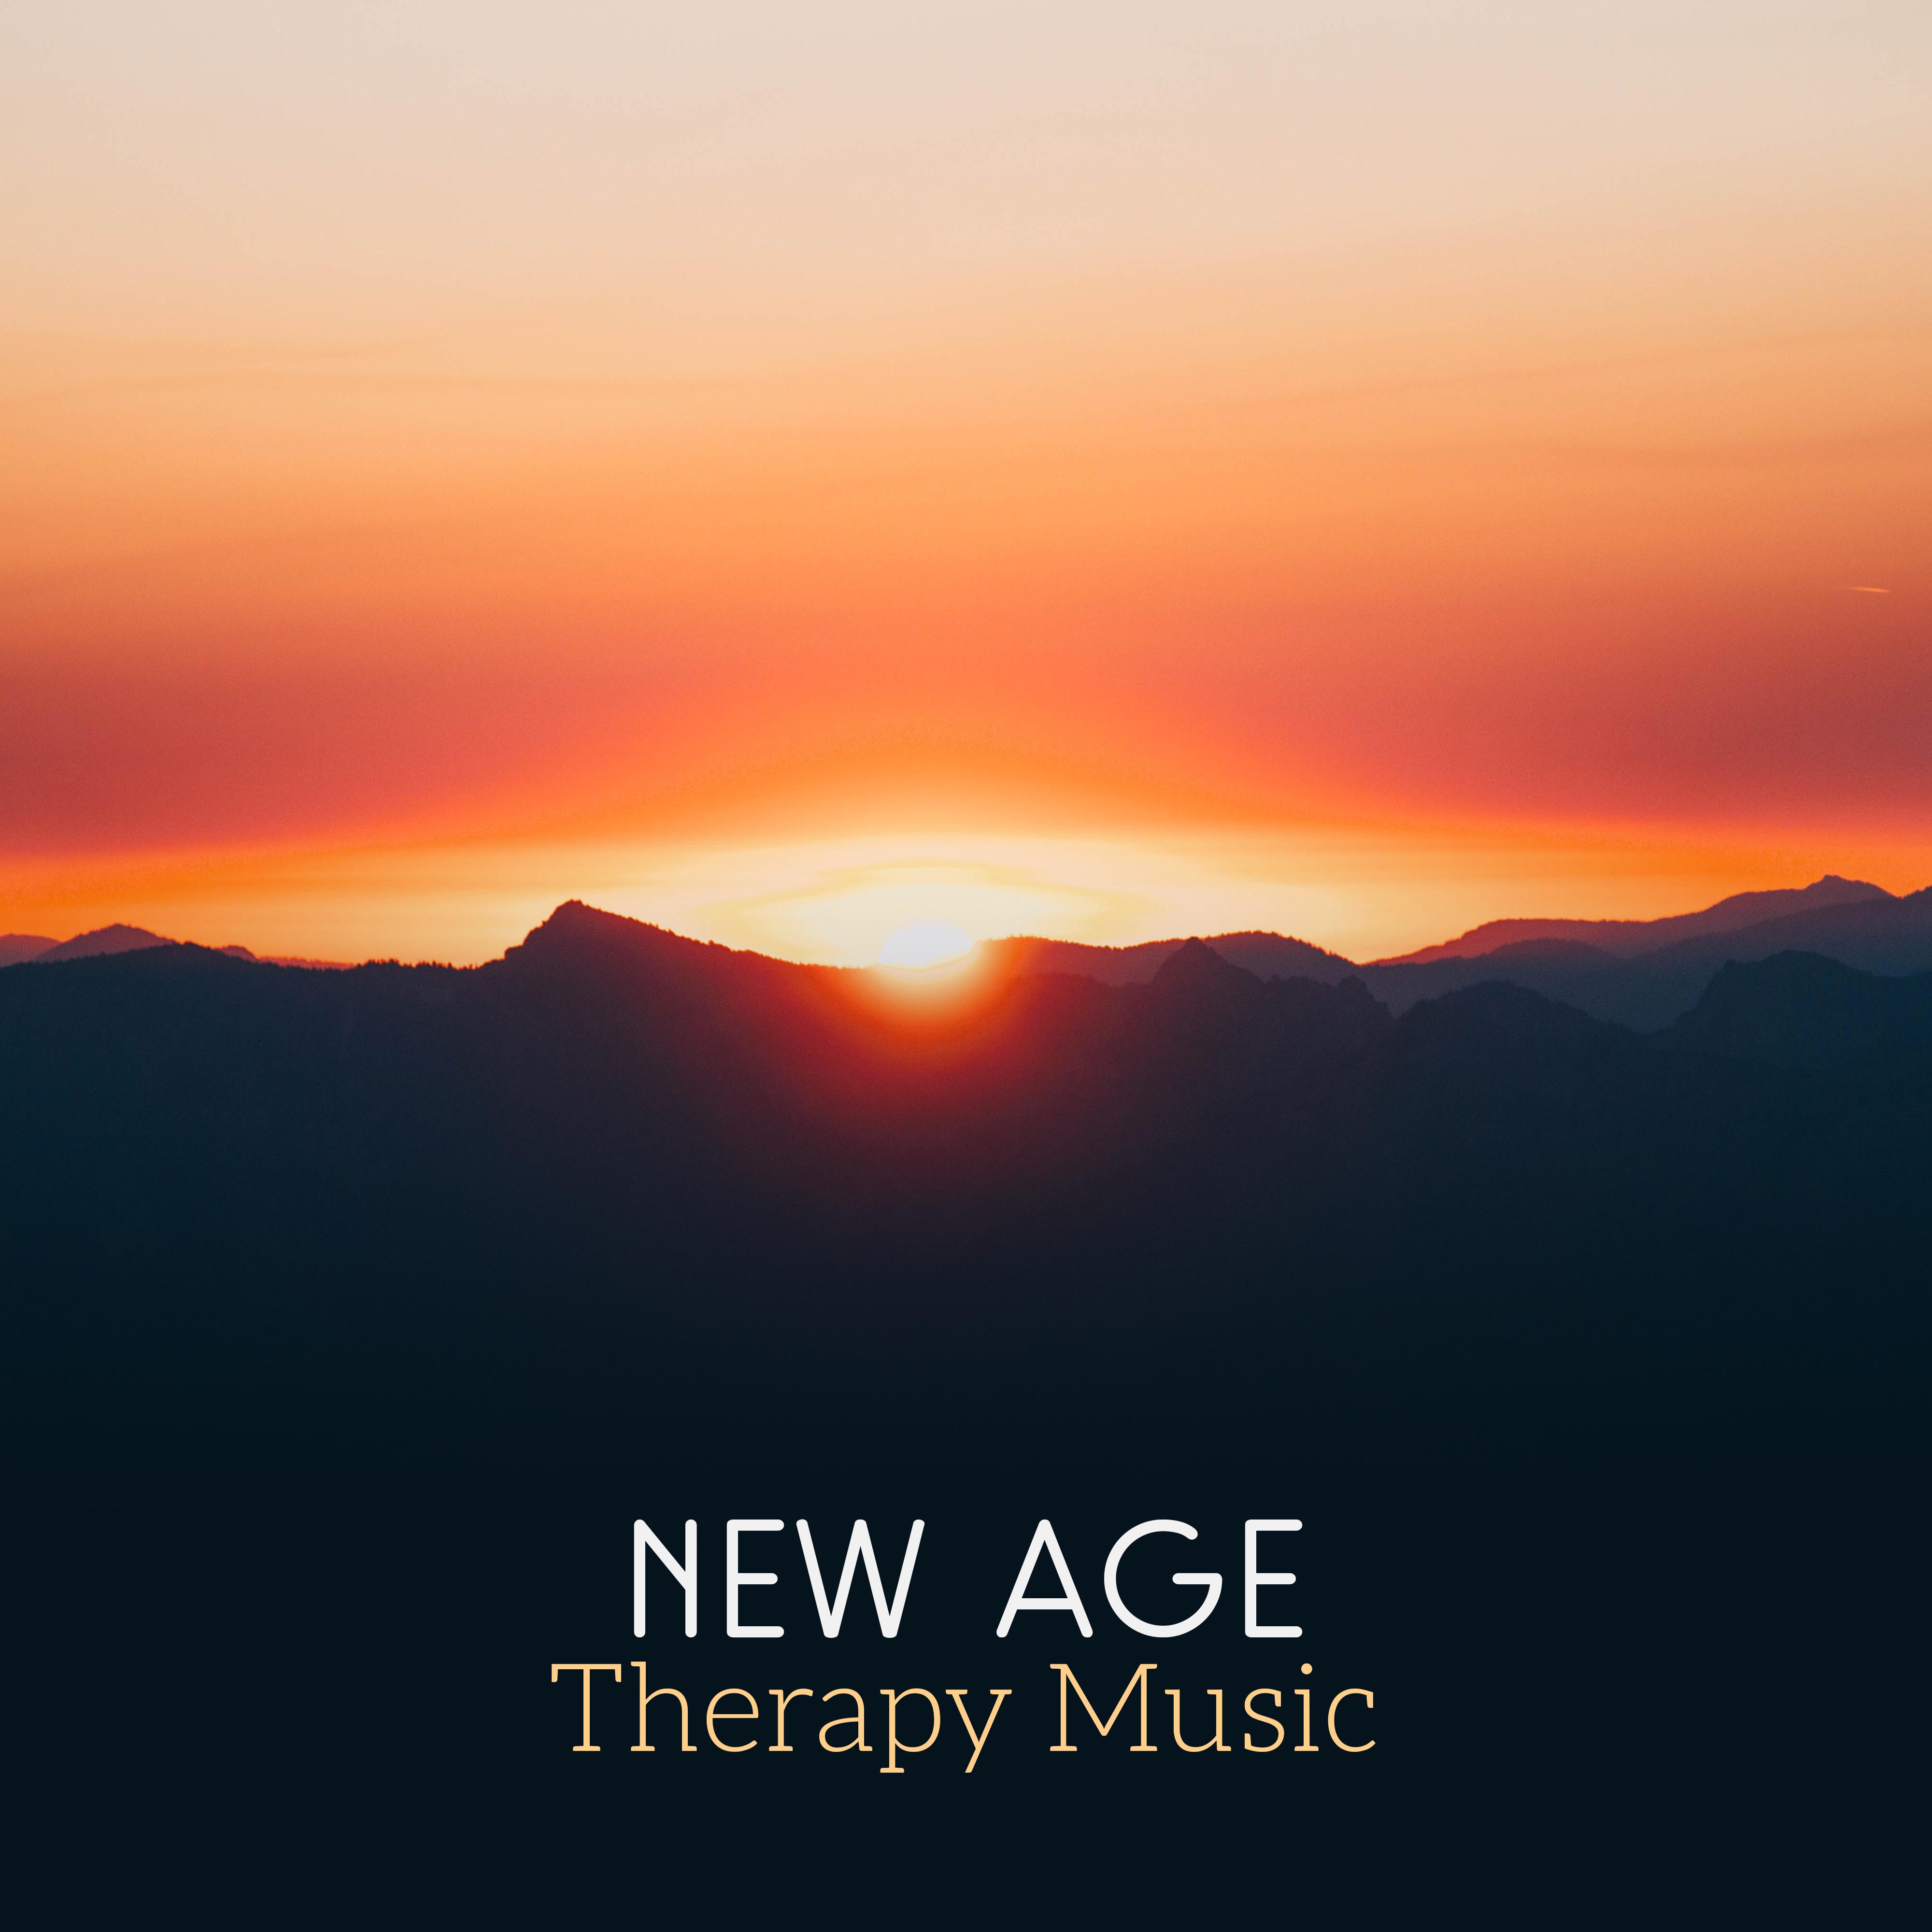 New Age Therapy Music